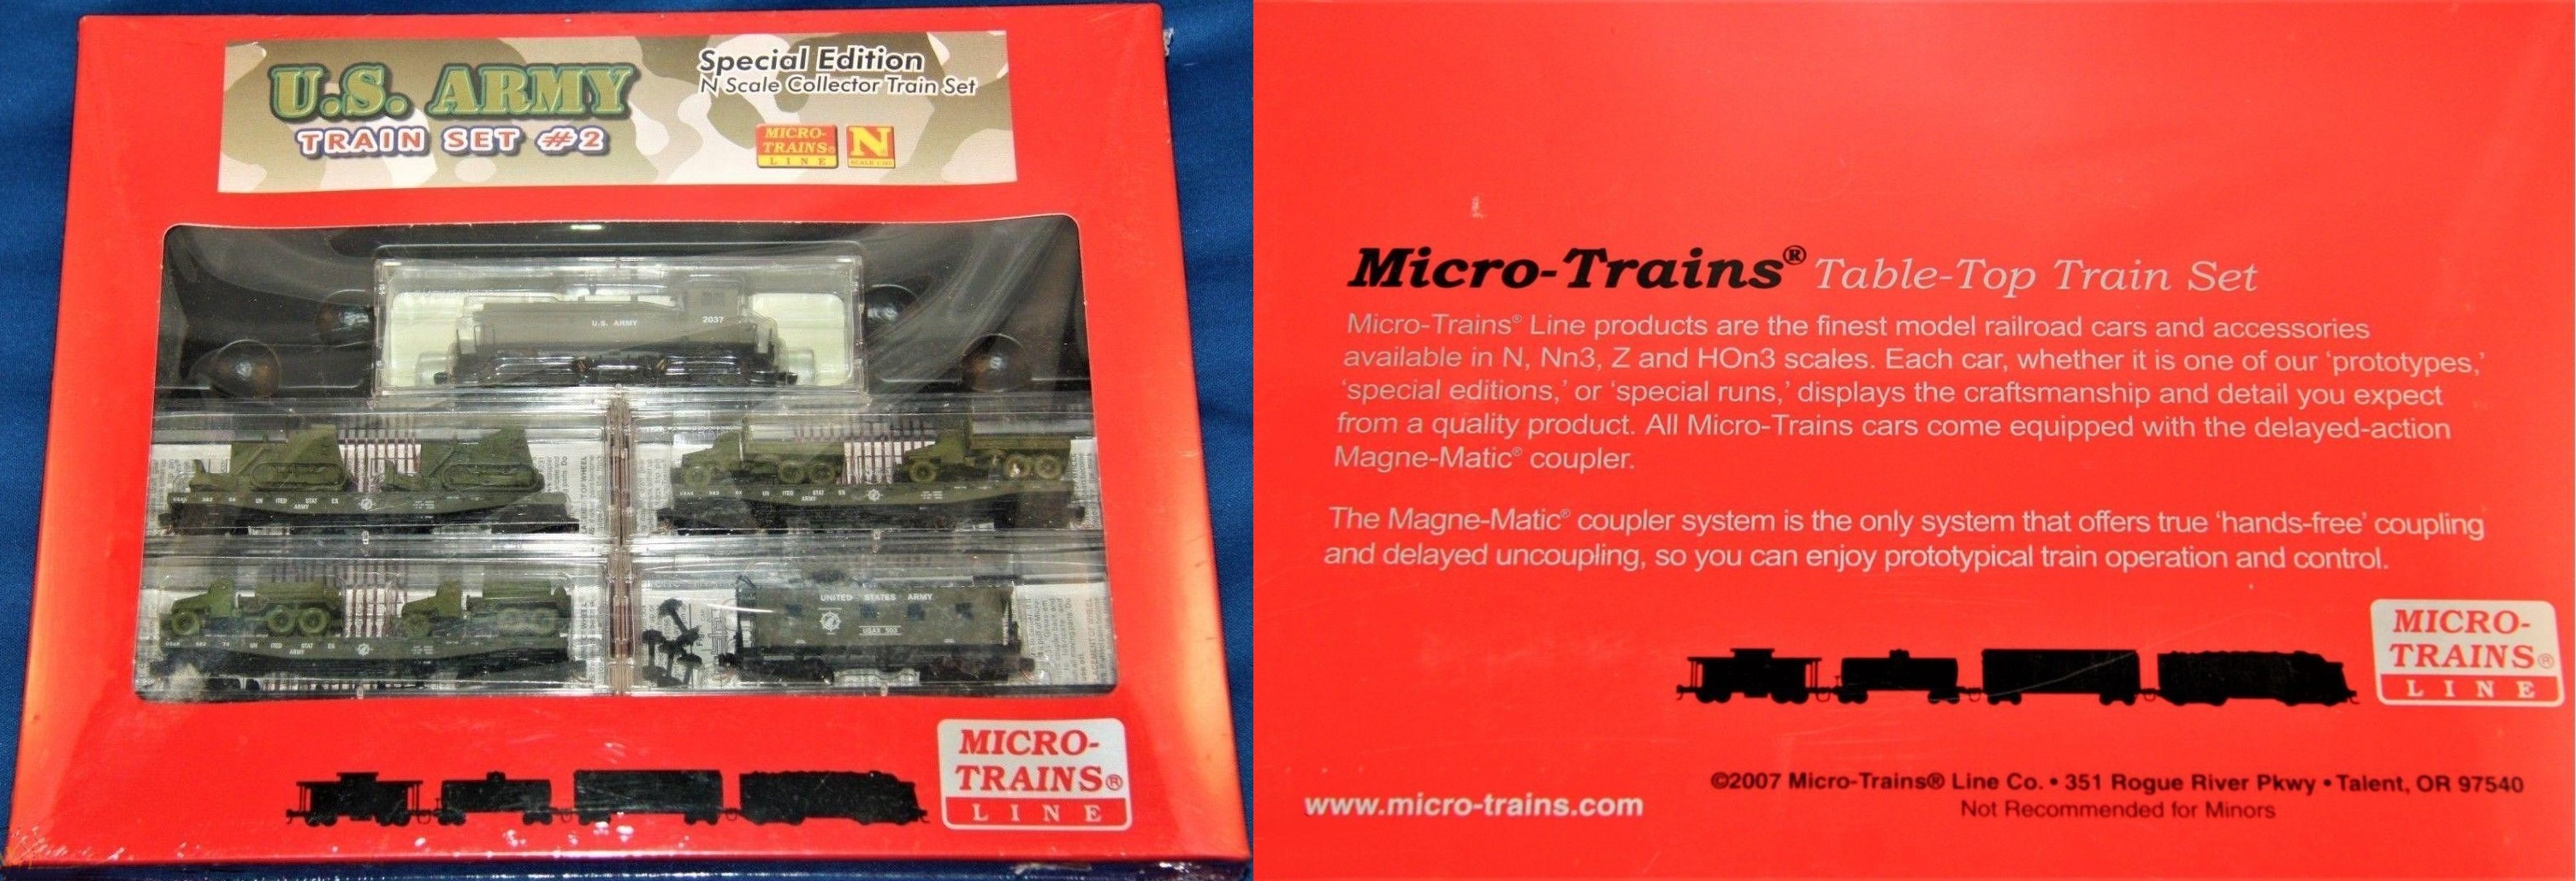 N Scale - Micro-Trains - 993 01 030 - Mixed Freight Consist, North America, Transition Era - United States Army - Set 2 (5-Pack)